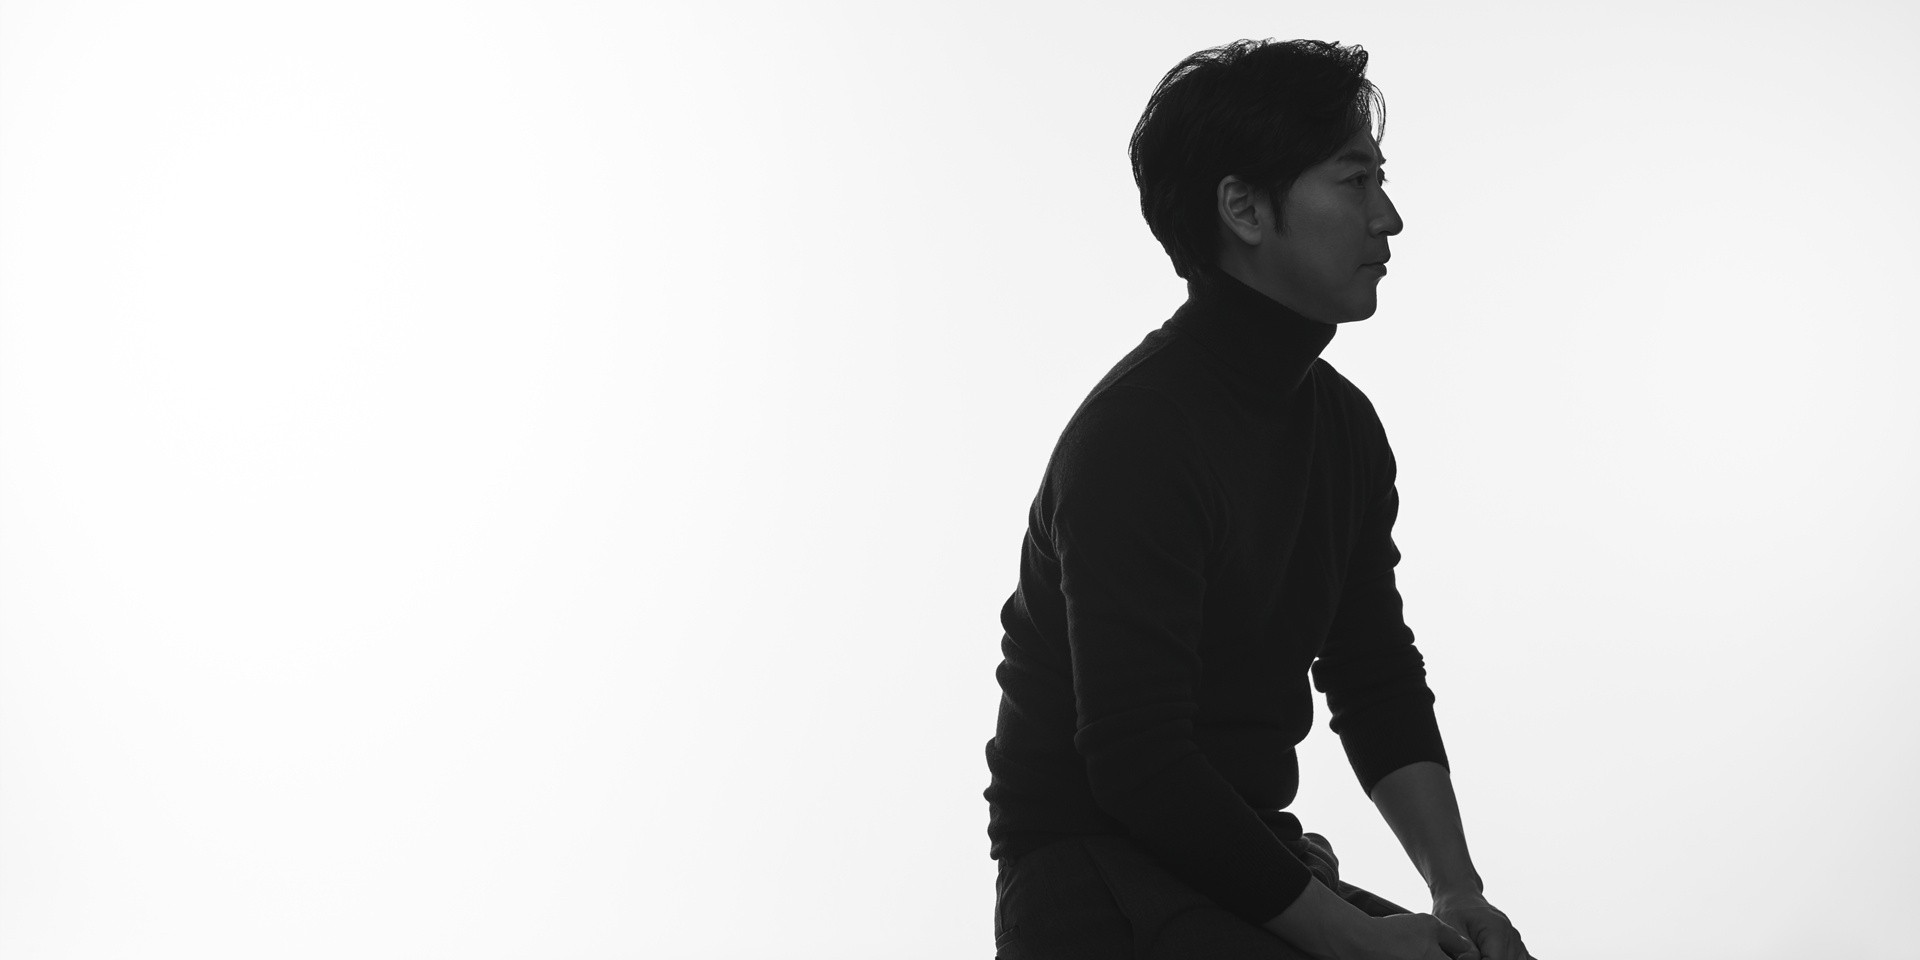 "I just want my music to be the energy that makes many people want to live a better life": An interview with Yiruma